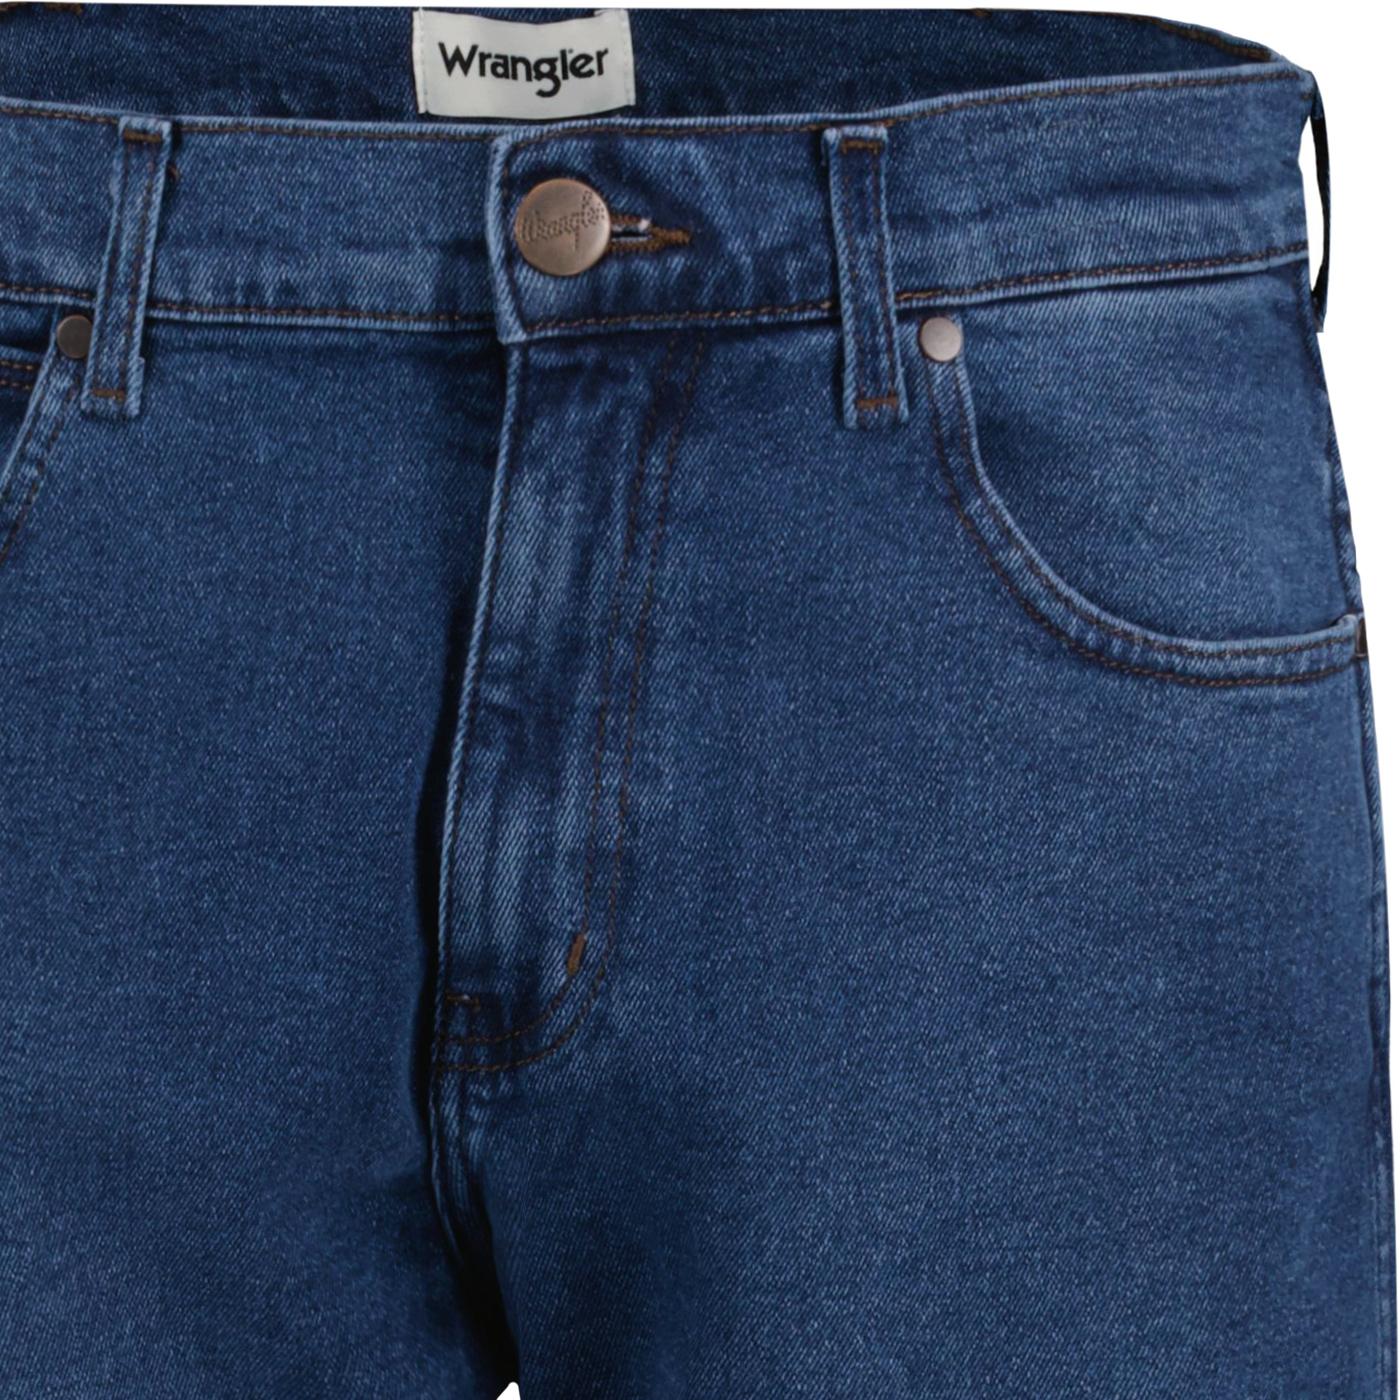 Wrangler Frontier Relaxed Straight Cut Jeans in Look In Blue.